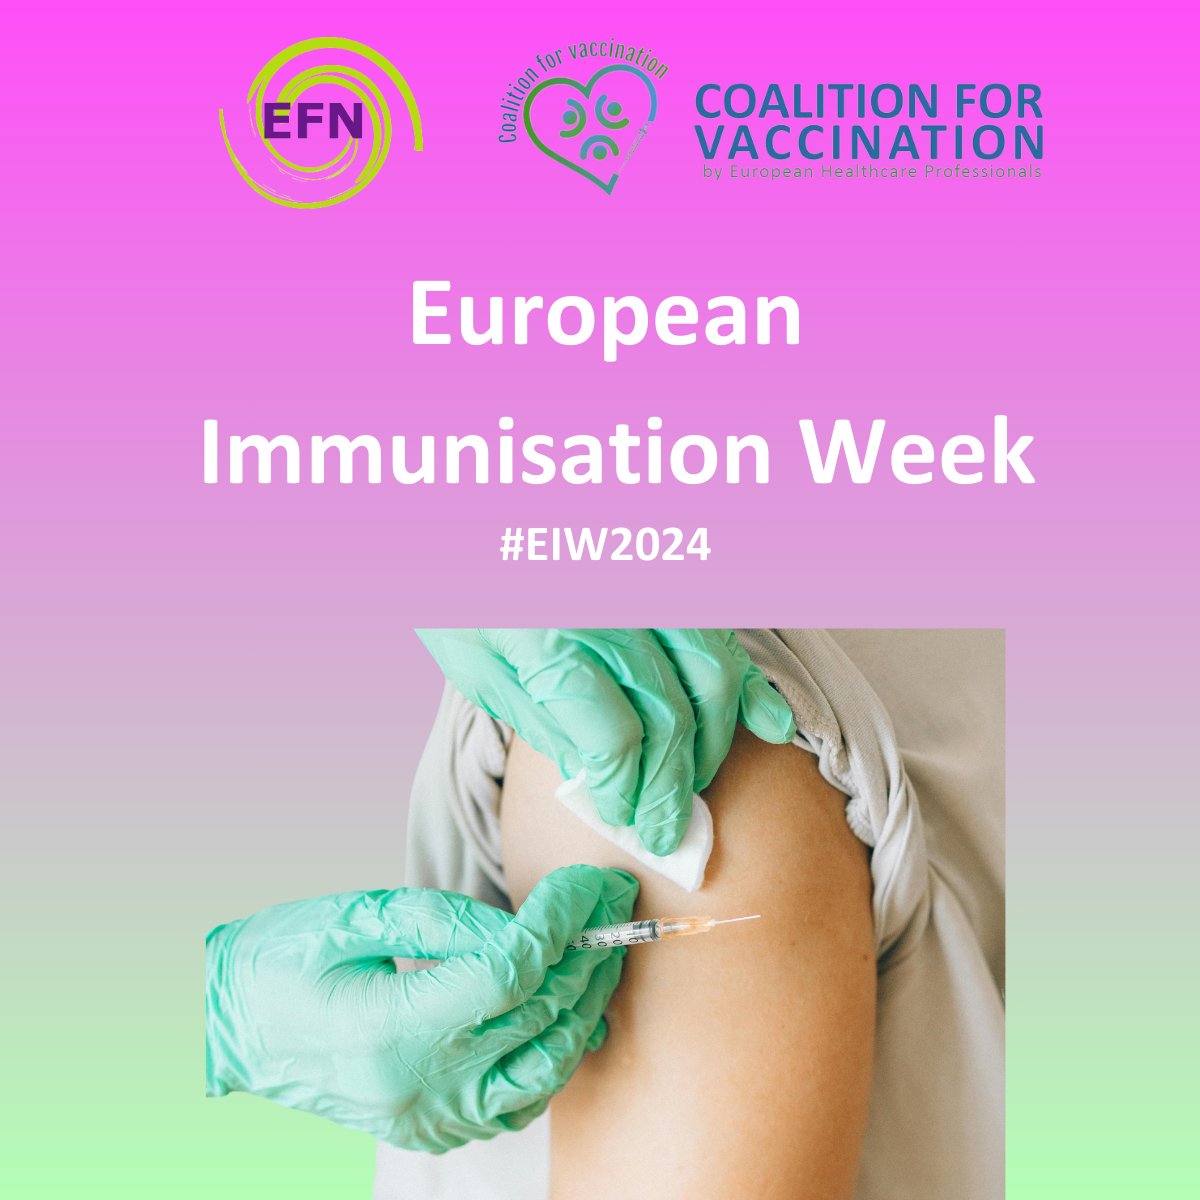 Do not hesitate to get vaccinated! If you have any doubt, always remember that nurses there to support you. #EFN #EIW2024 #GetVaccinated #Nursesforvaccination #Nurses #Prevention #Longlifeforall #EPI #Vaccinesforall #vaccination #coalitionforvaccination #UnitedInProtection